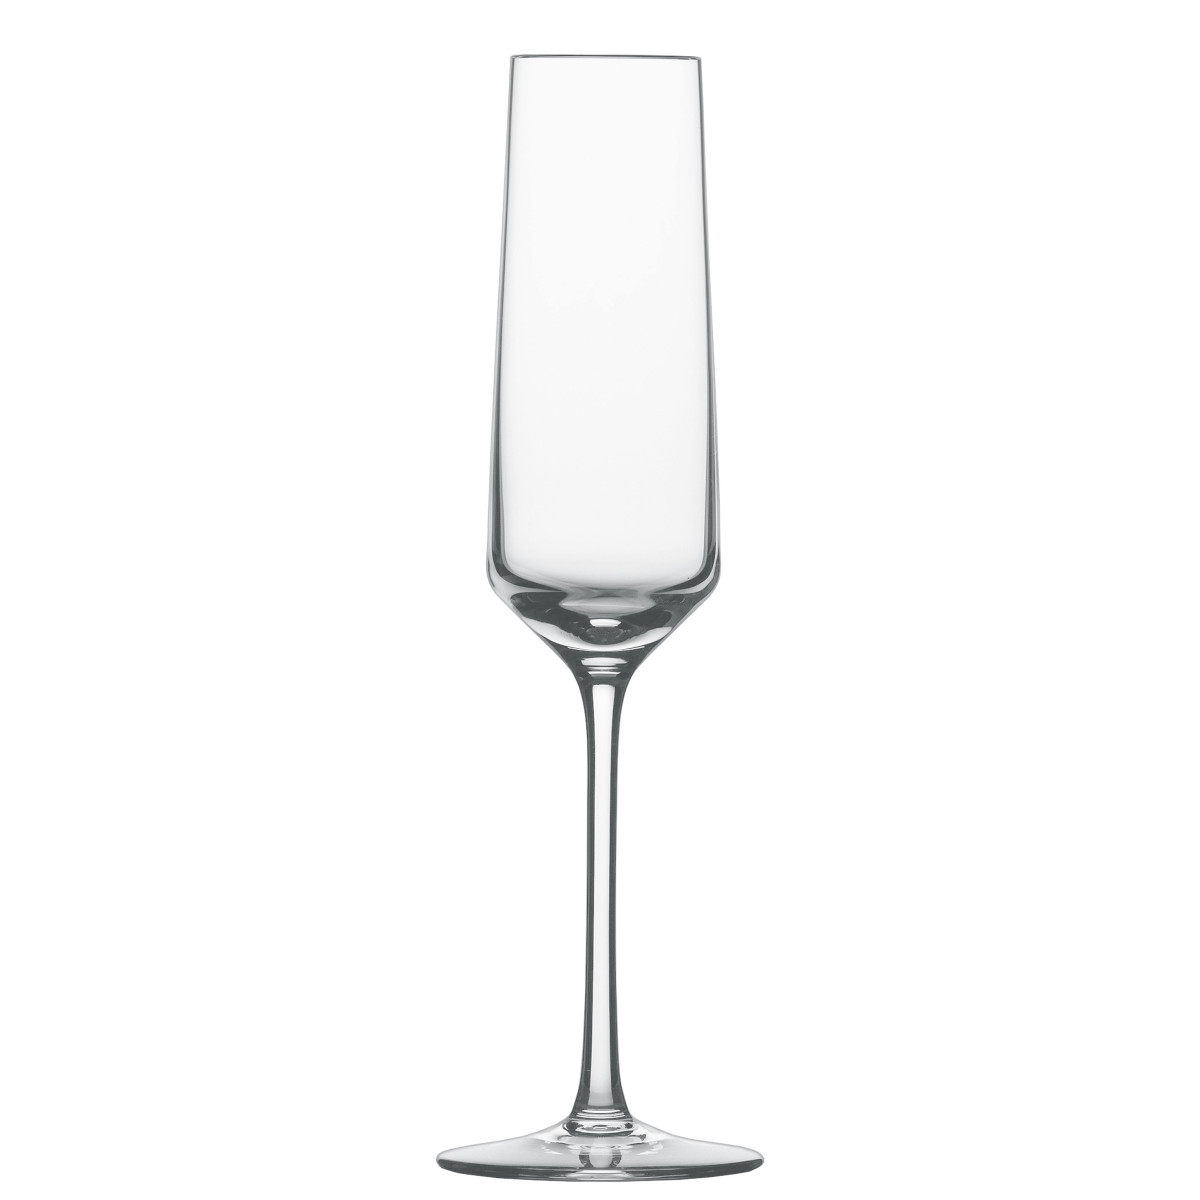 Zwiesel Glas Pure Champagne Flute, Set of 6